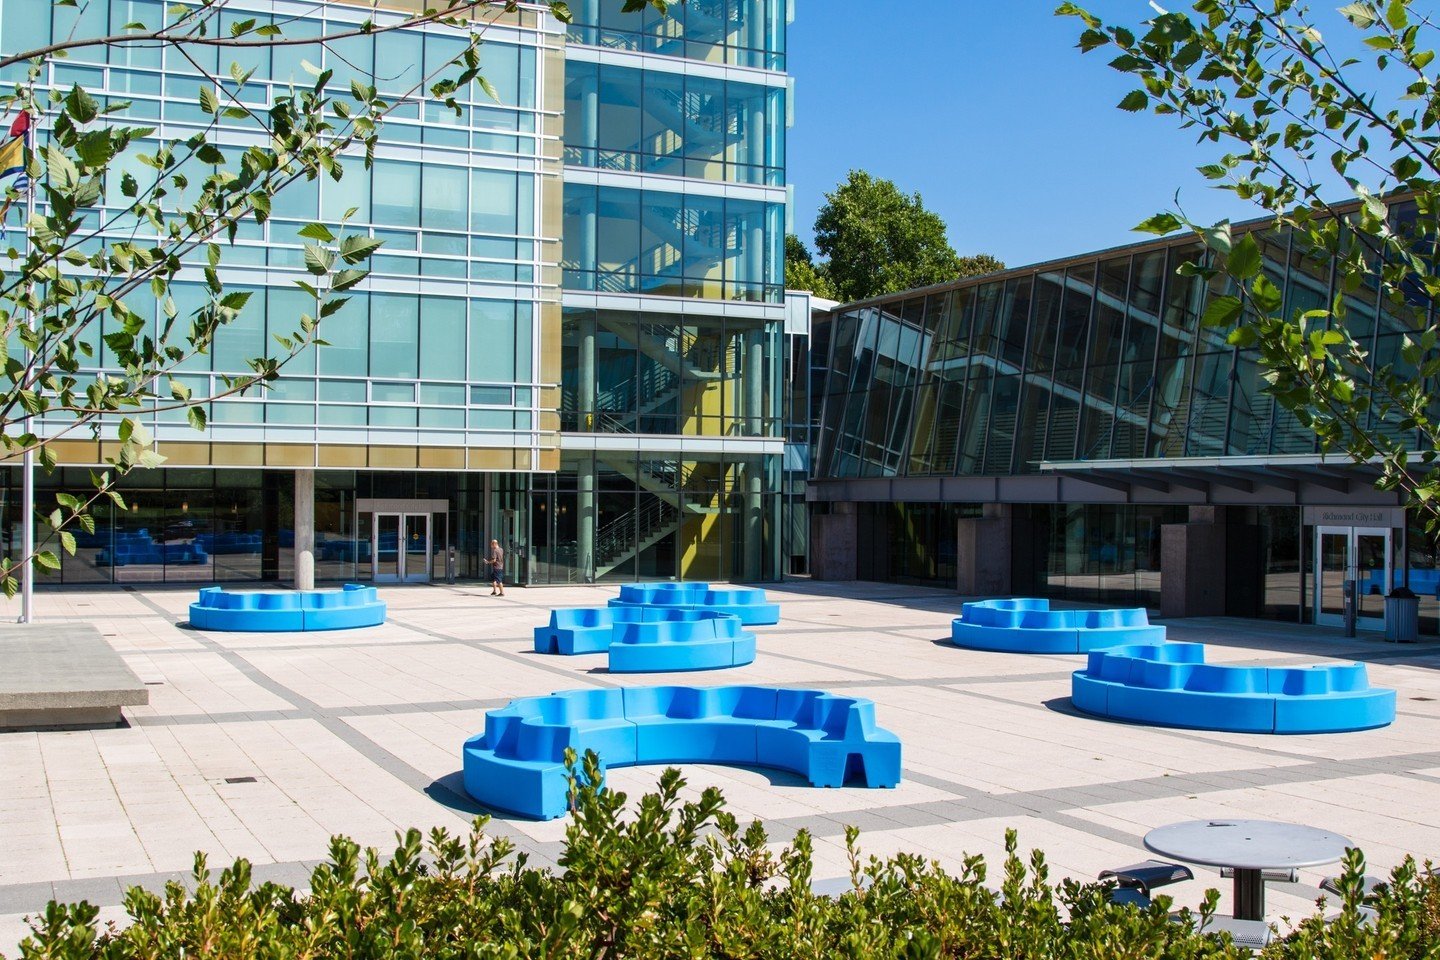 🏙️ Meander by Becki Chan and Milos Begovic returns to liven up public spaces in Brighouse Village. From May to October, the electric blue artist-designed modular seating units will be installed at Richmond City Hall Plaza, Richmond Cultural Centre P